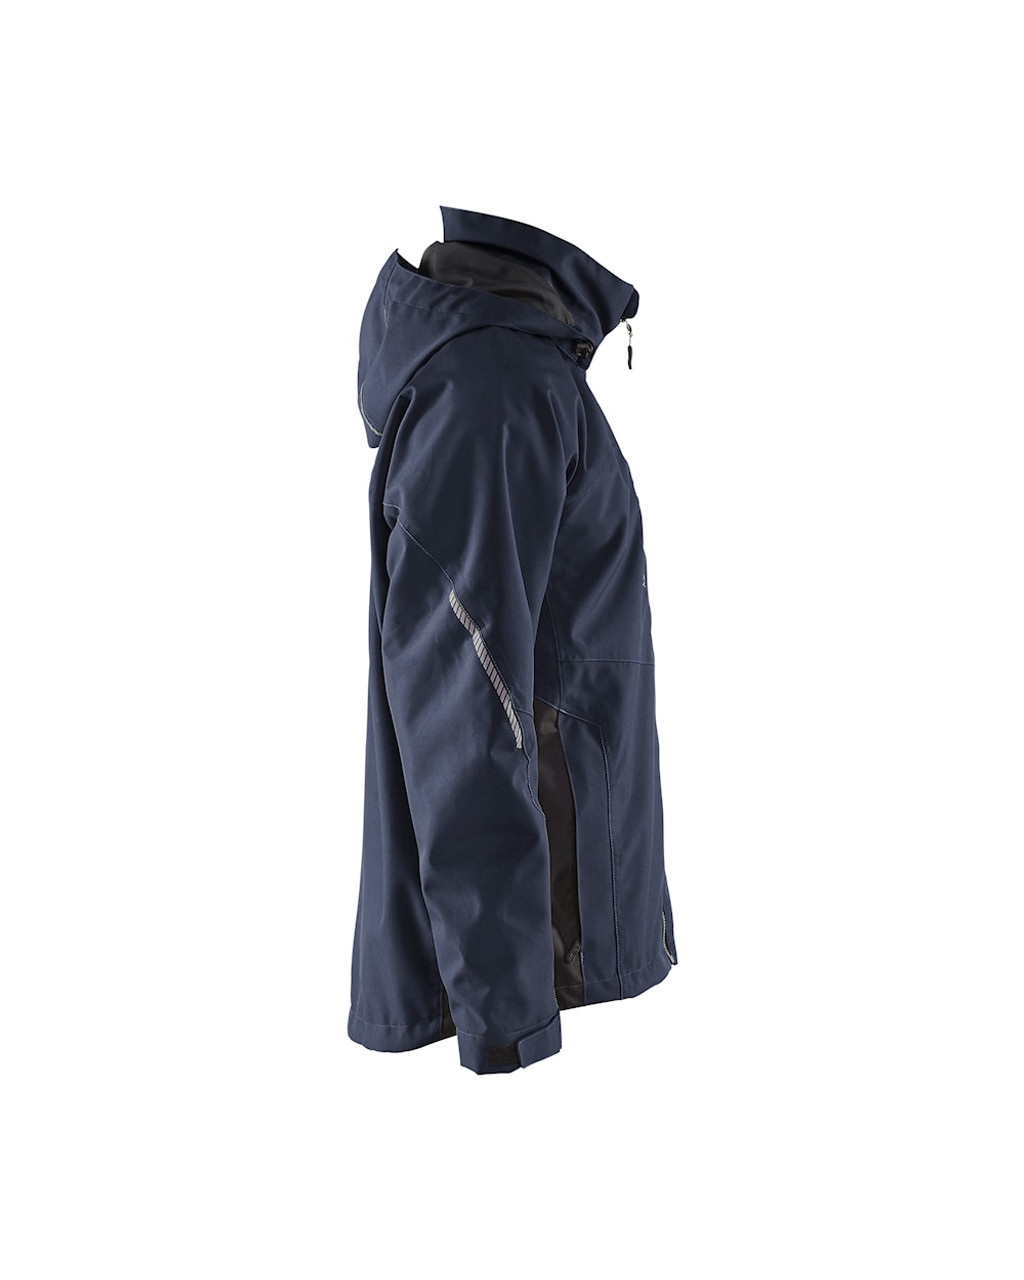 BLAKLADER Polyester Waterproof Dark Navy Blue  Jacket  for Carpenters that have Full Zip  available in Australia and New Zealand